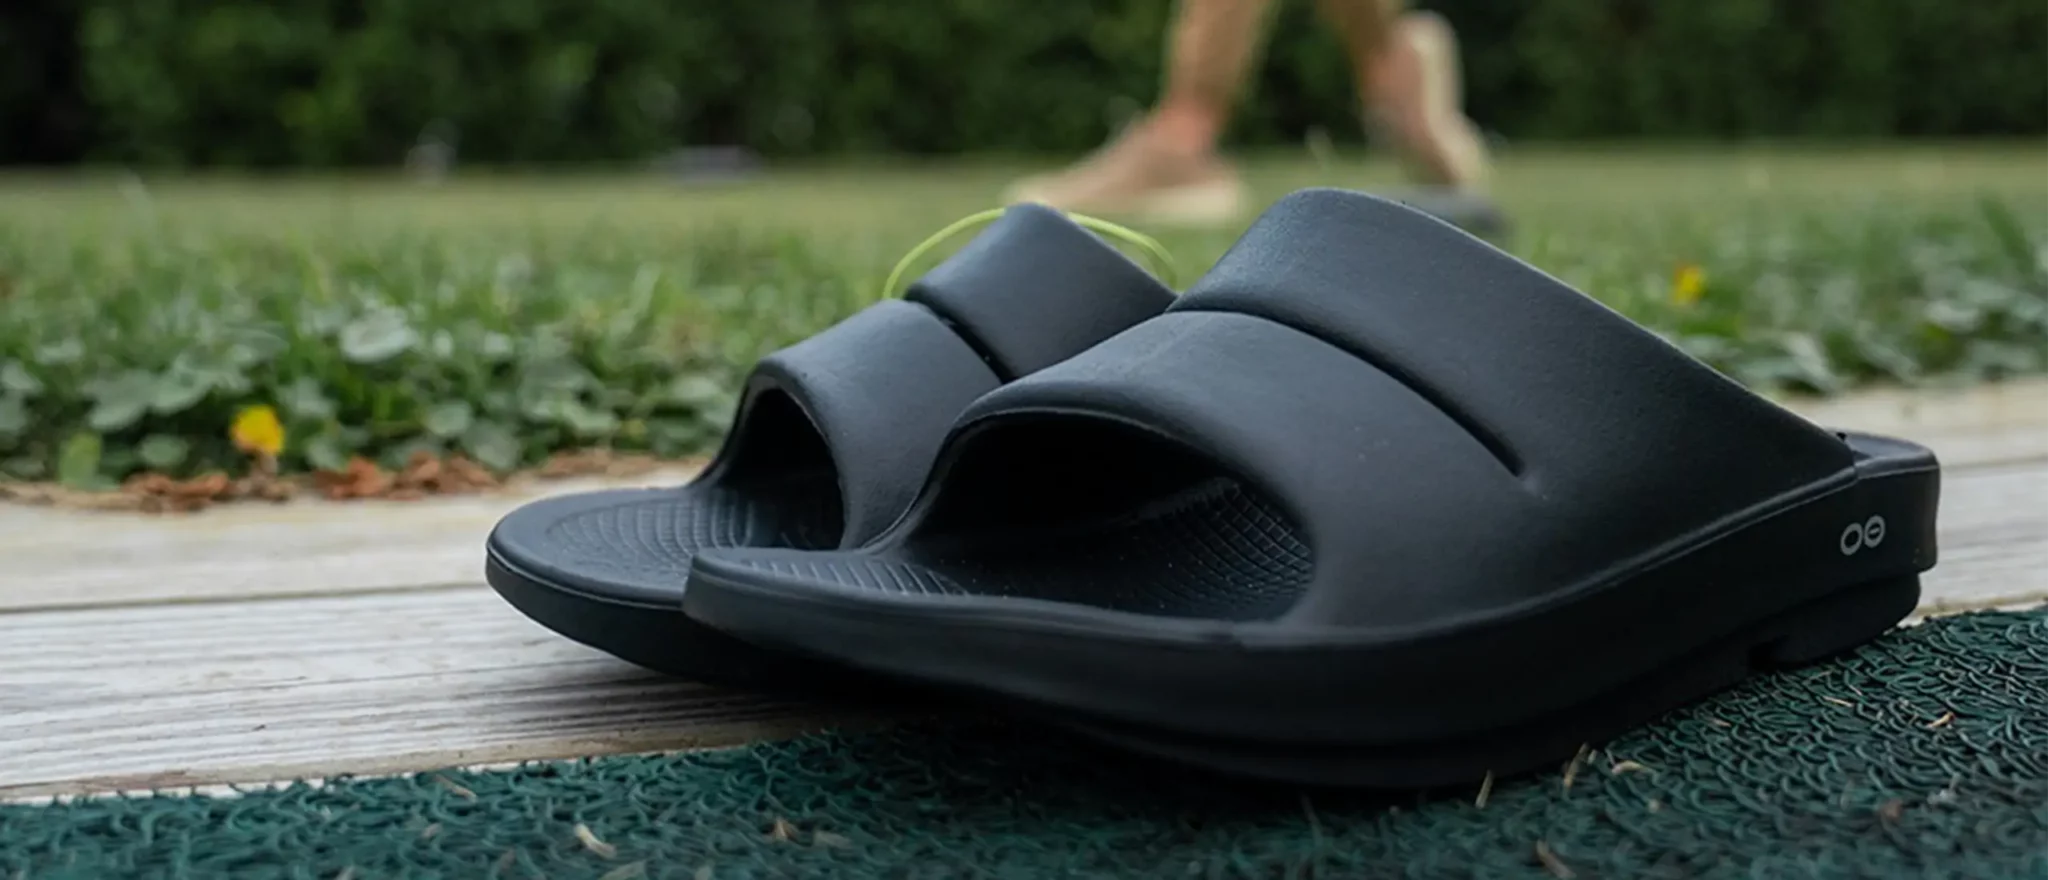 These Oofos Recovery Slides Feel Like Walking on Clouds